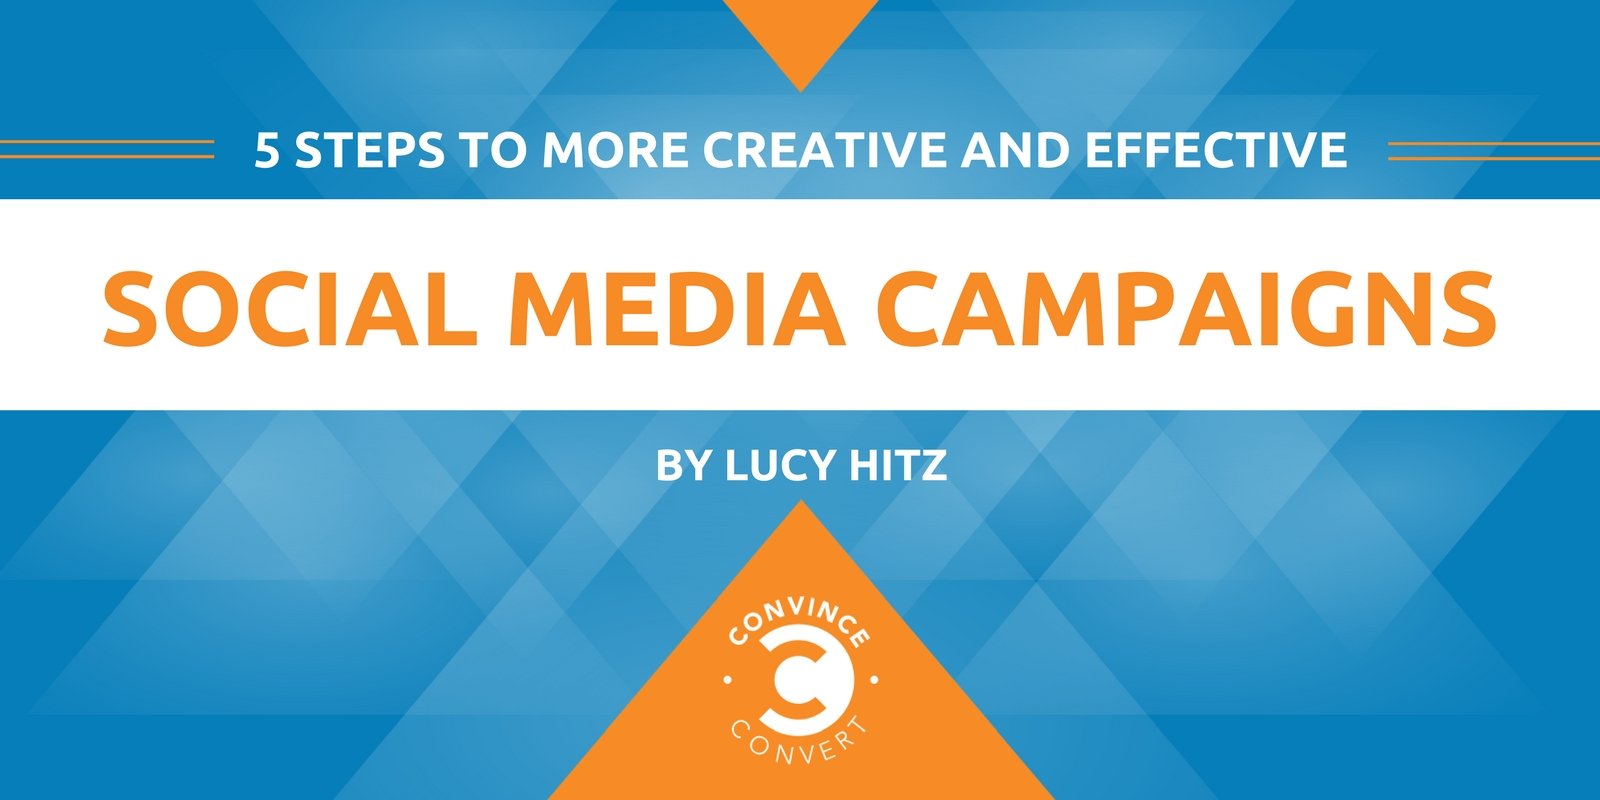 5 Steps to More Creative and Effective Social Media Campaigns